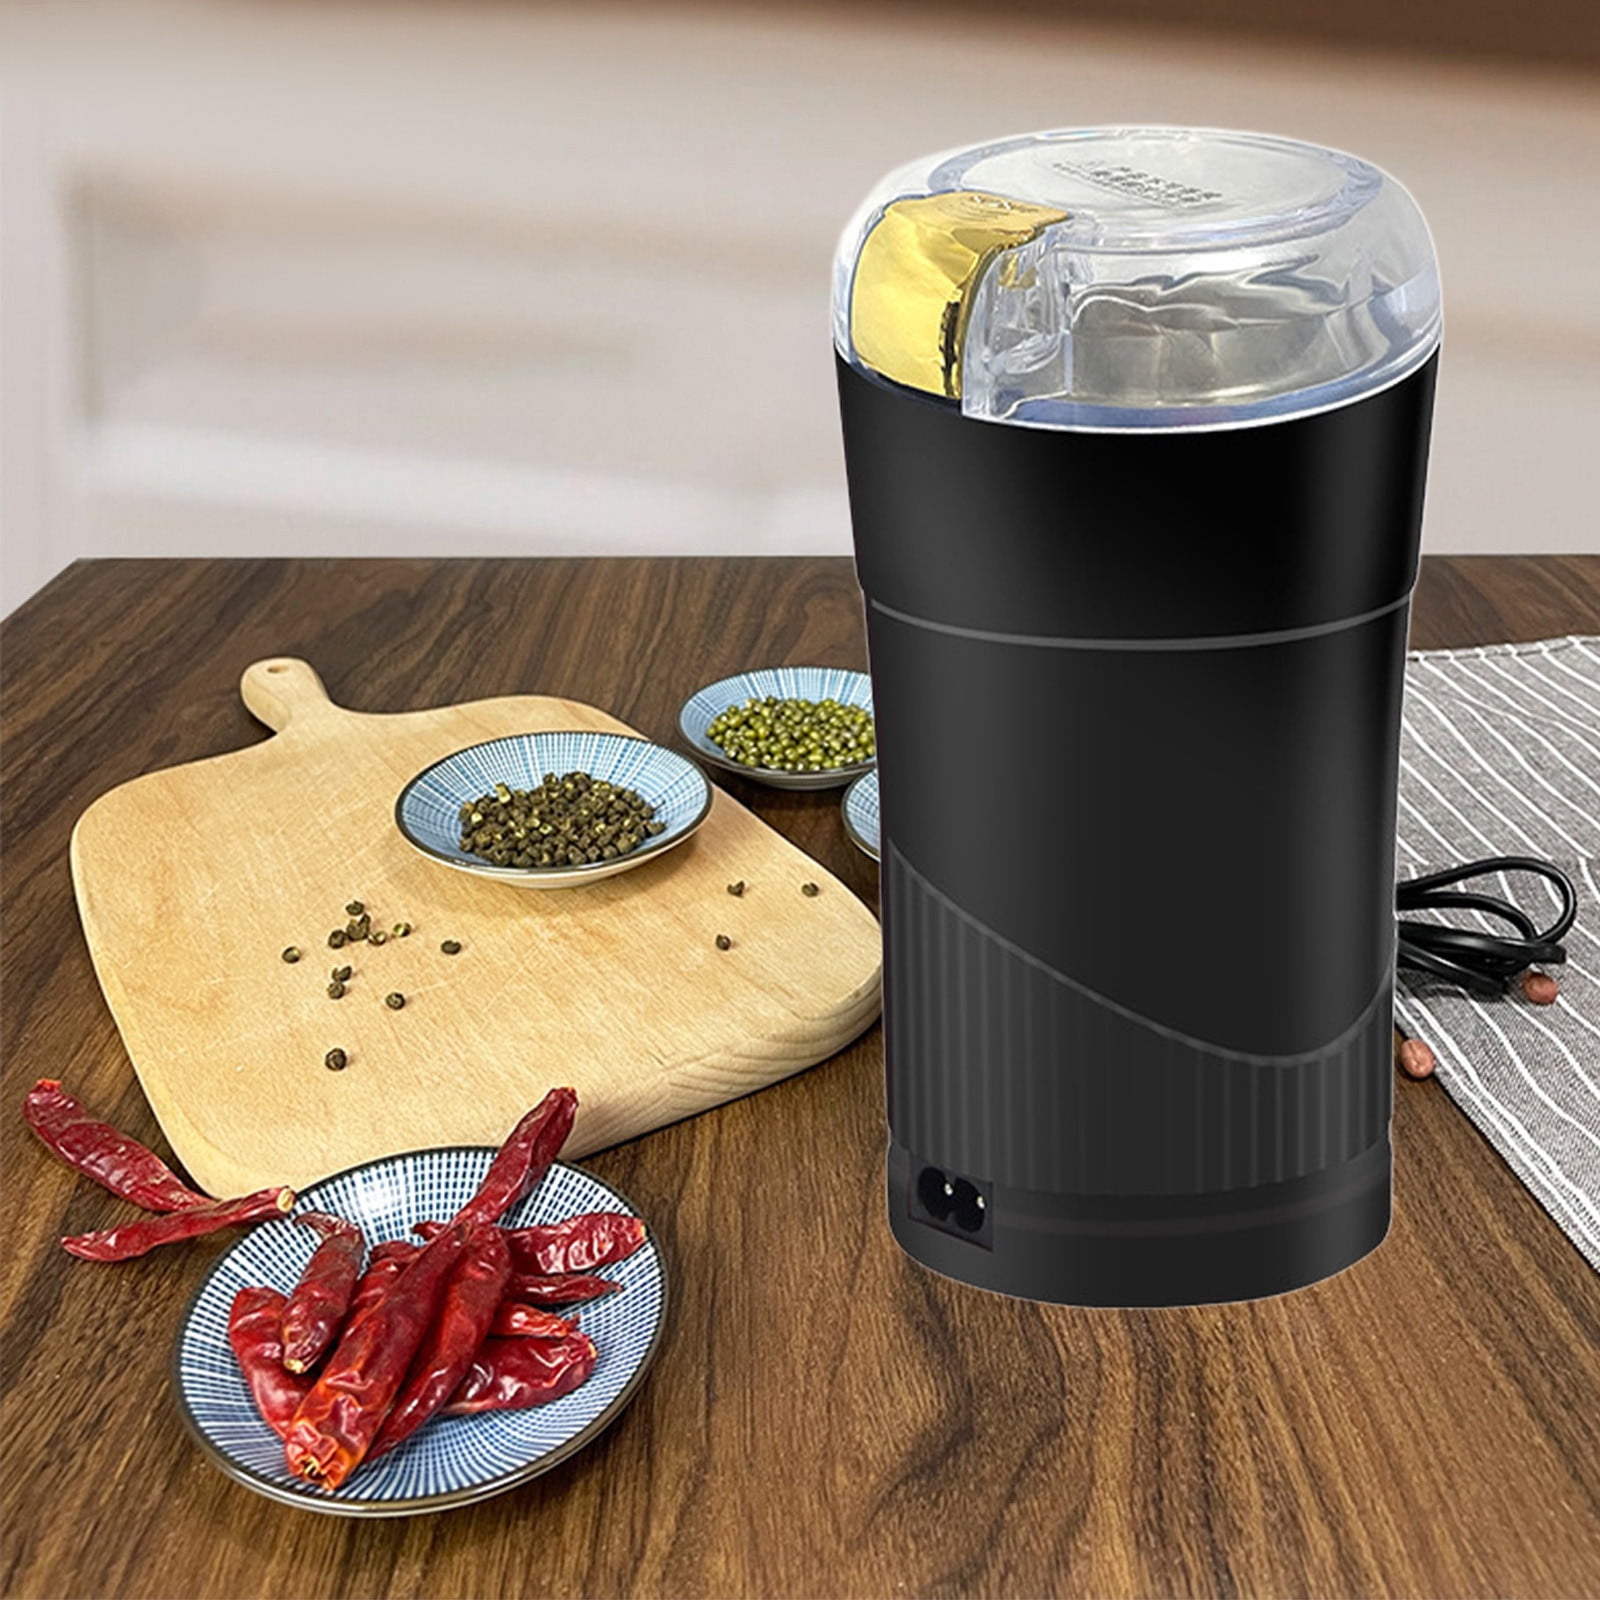  Watifisa Herb Grinder Electric Spice Grinder with Cleaning  Brush, Herb Spice Coffee Grinder with Large Capacity - for Herbs, Fine  Leaves, Peanuts, Pepper Beans, Mushrooms & Grains (Black): Home & Kitchen